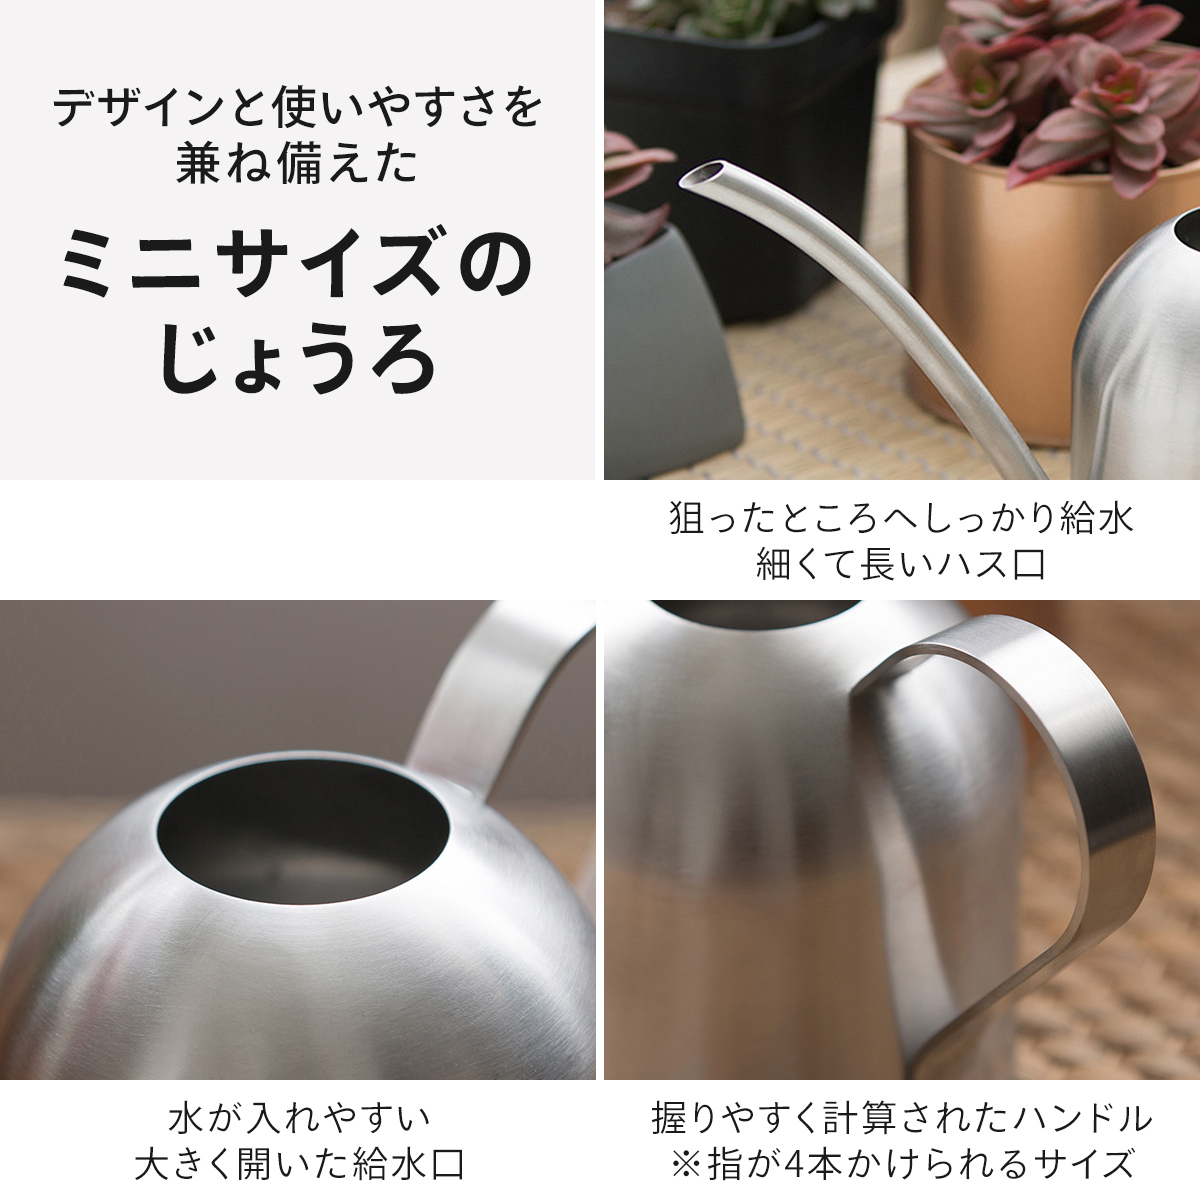  watering can stylish interior 500ml high capacity small decorative plant stainless steel Joe ro stylish jouro small small size Northern Europe . rain . Mini watering can pitcher succulent plant 